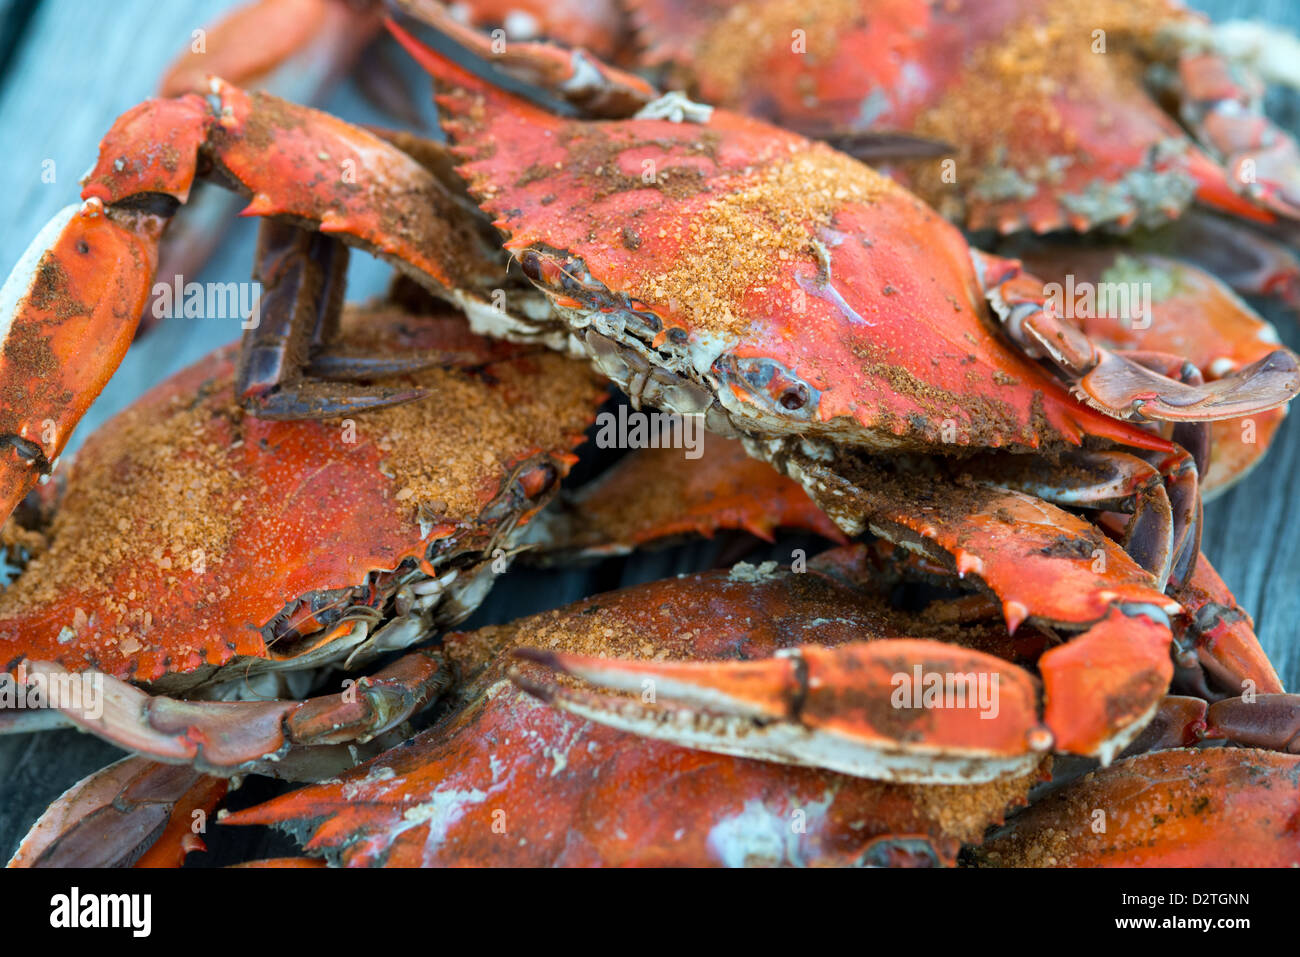 Steamed crabs with Old Bay seasoning on a pier by the shoreline Stock Photo